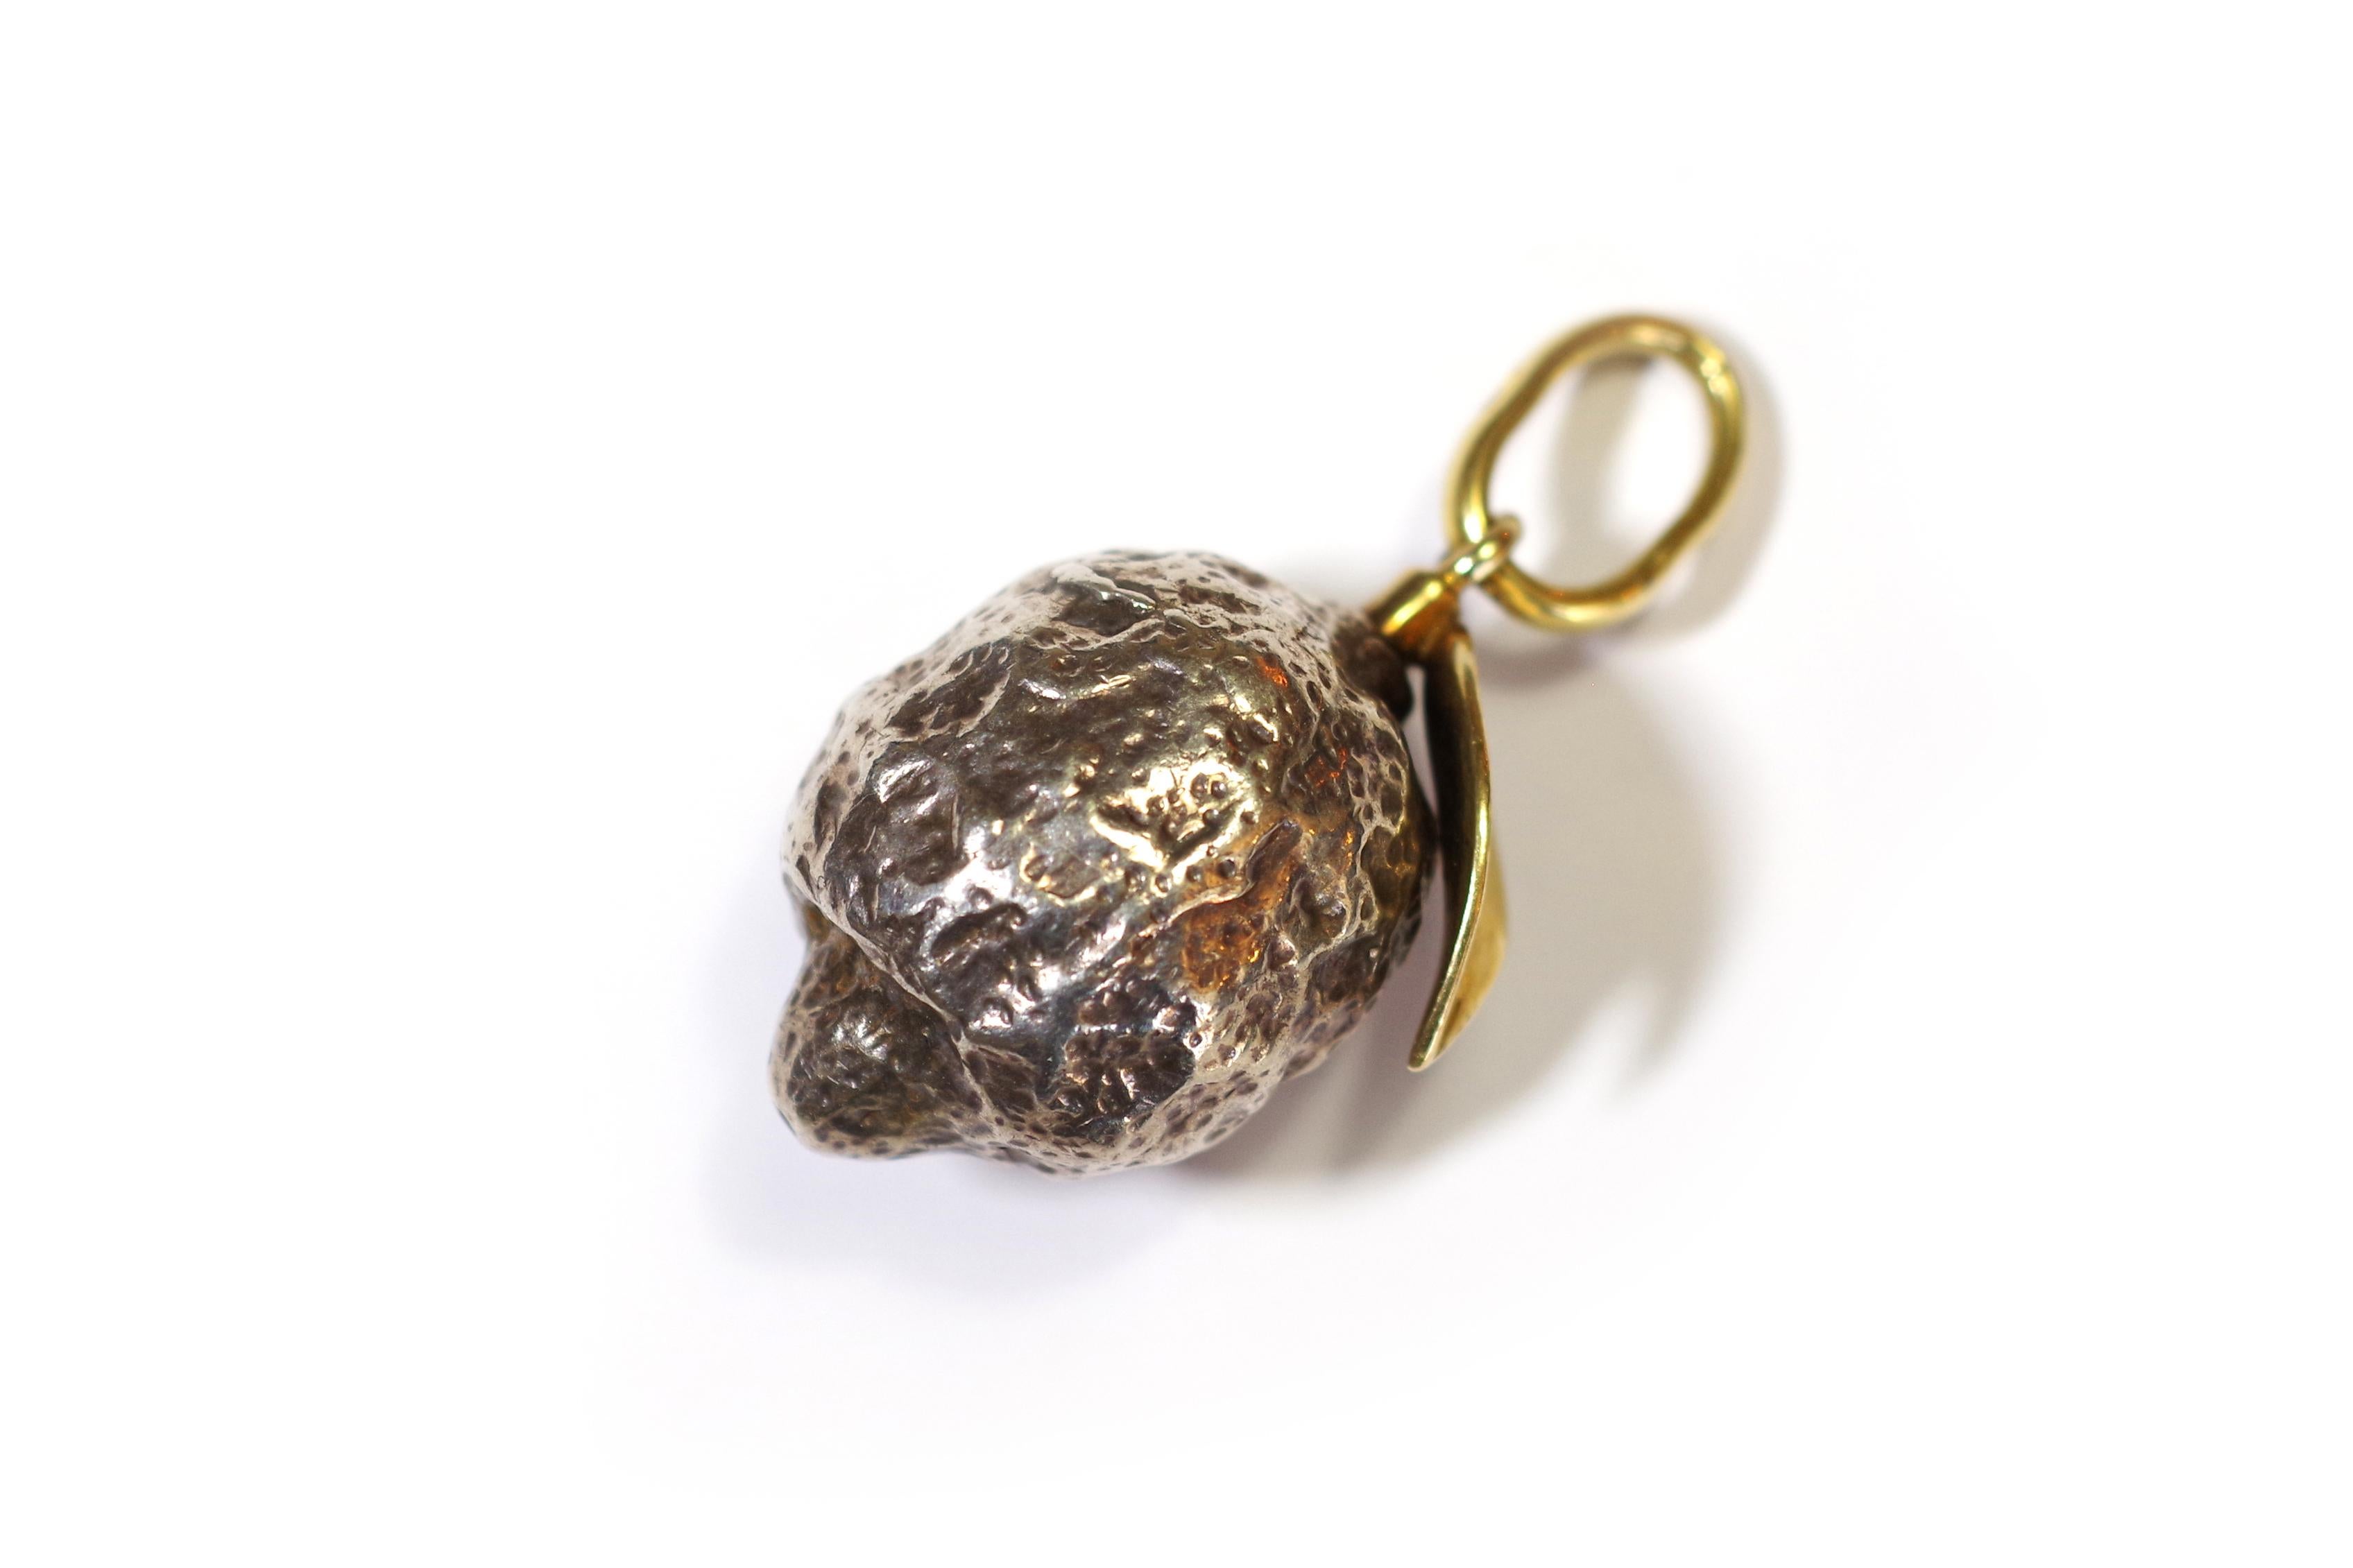 Vintage Pomellato lemon pendant in 18 karat gold and silver. Important naturalist pendant representing a lemon. The pendant is made entirely of silver with a gold leaf attached to the fruit. Vintage jewel from the early years of the Italian brand